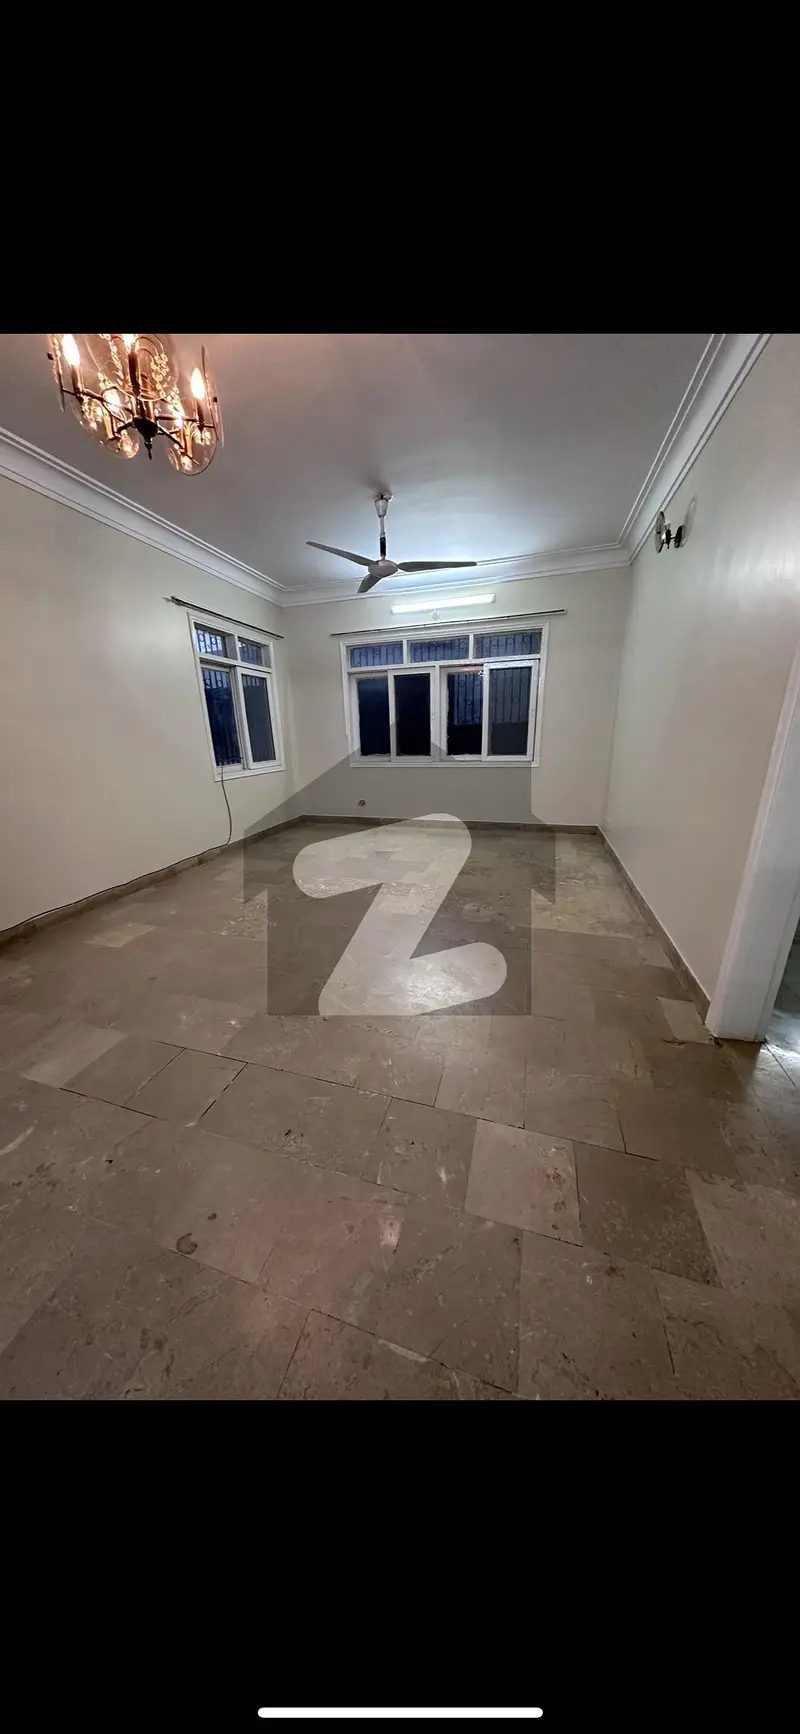 Here You Find Your Best Portion And Lives In Premium Block Of Gulshan E Iqbal 1st Floor Portion Having 3 Bed Drawing Dinning Well Maintain Neat Clean West Open For Residential Rent.